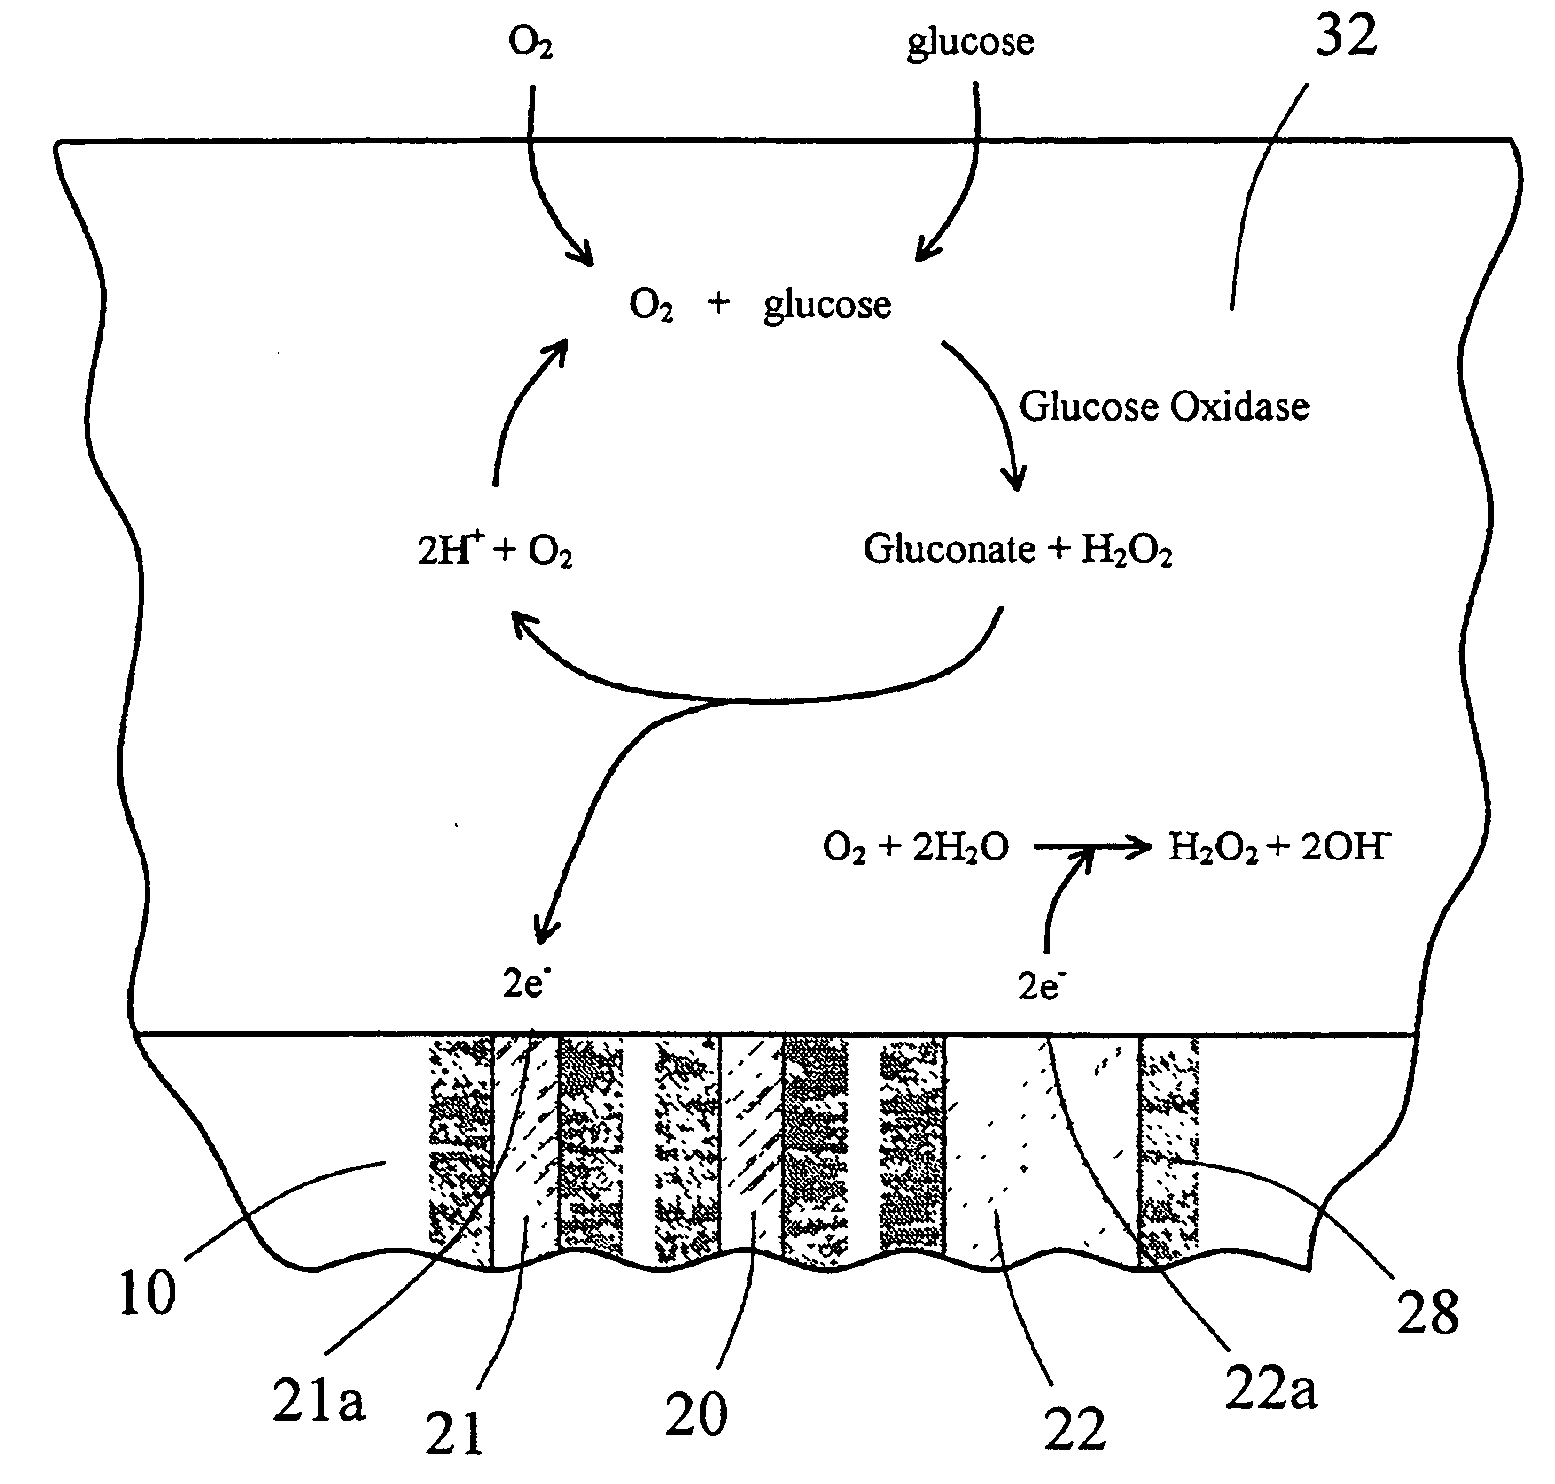 Sensor head for use with implantable devices